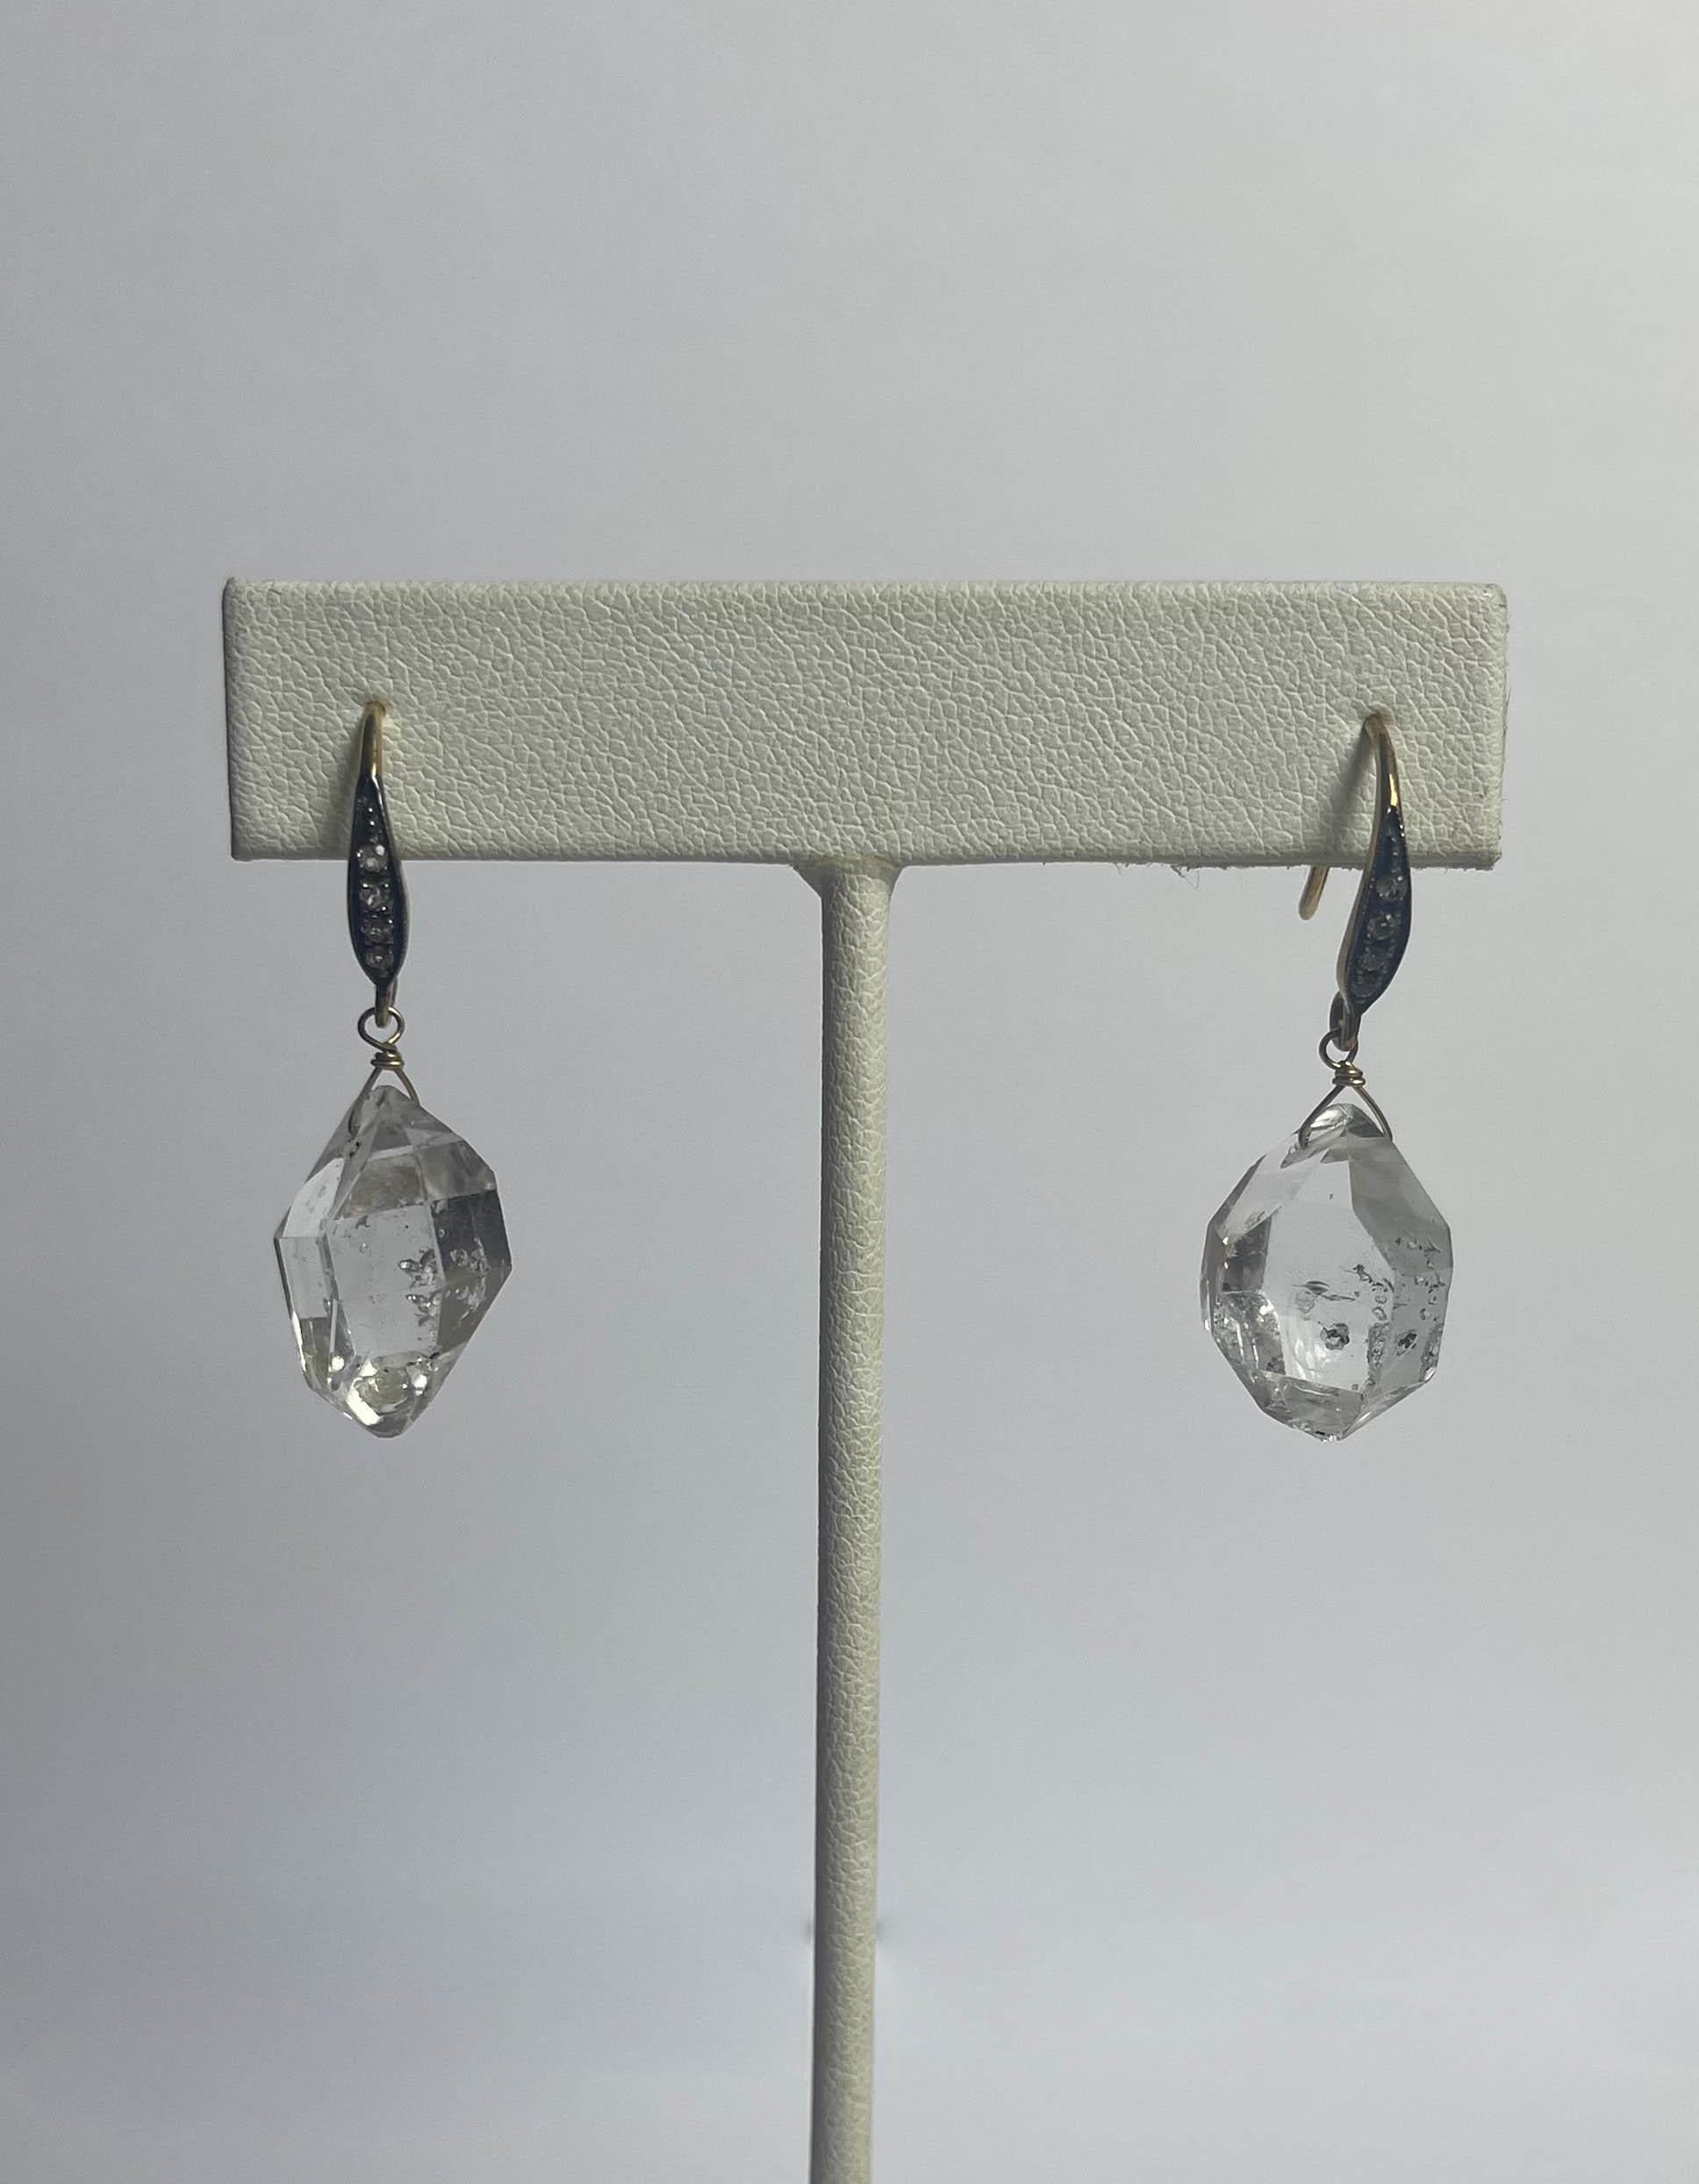 Margo Morrison Herkimer Diamond & White Sapphire Earrings
Materials: Diamond, White Sapphire, Sterling
Hallmarks: 925
Closure/Opening: Pierced wire
Overall Condition: Excellent - mismatched rubber backs
Estimated Retail: $295

Measurements:
Length: